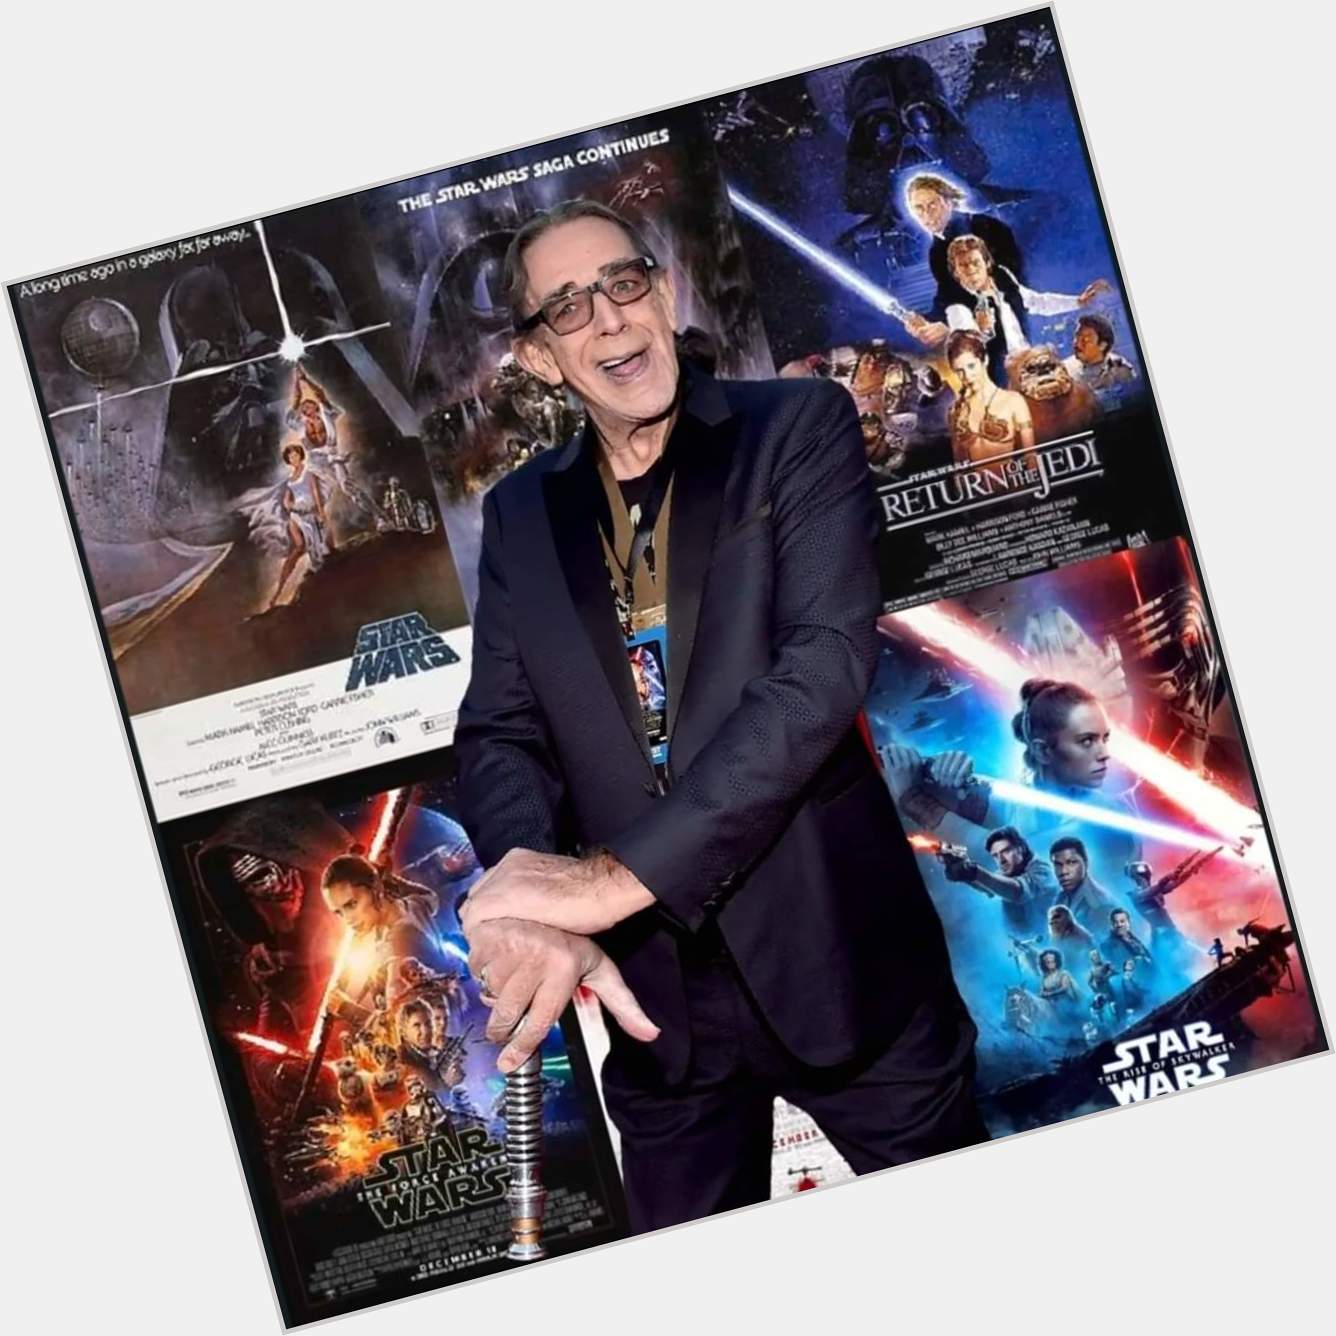 Happy birthday to the late
Peter Mayhew.
RIP   